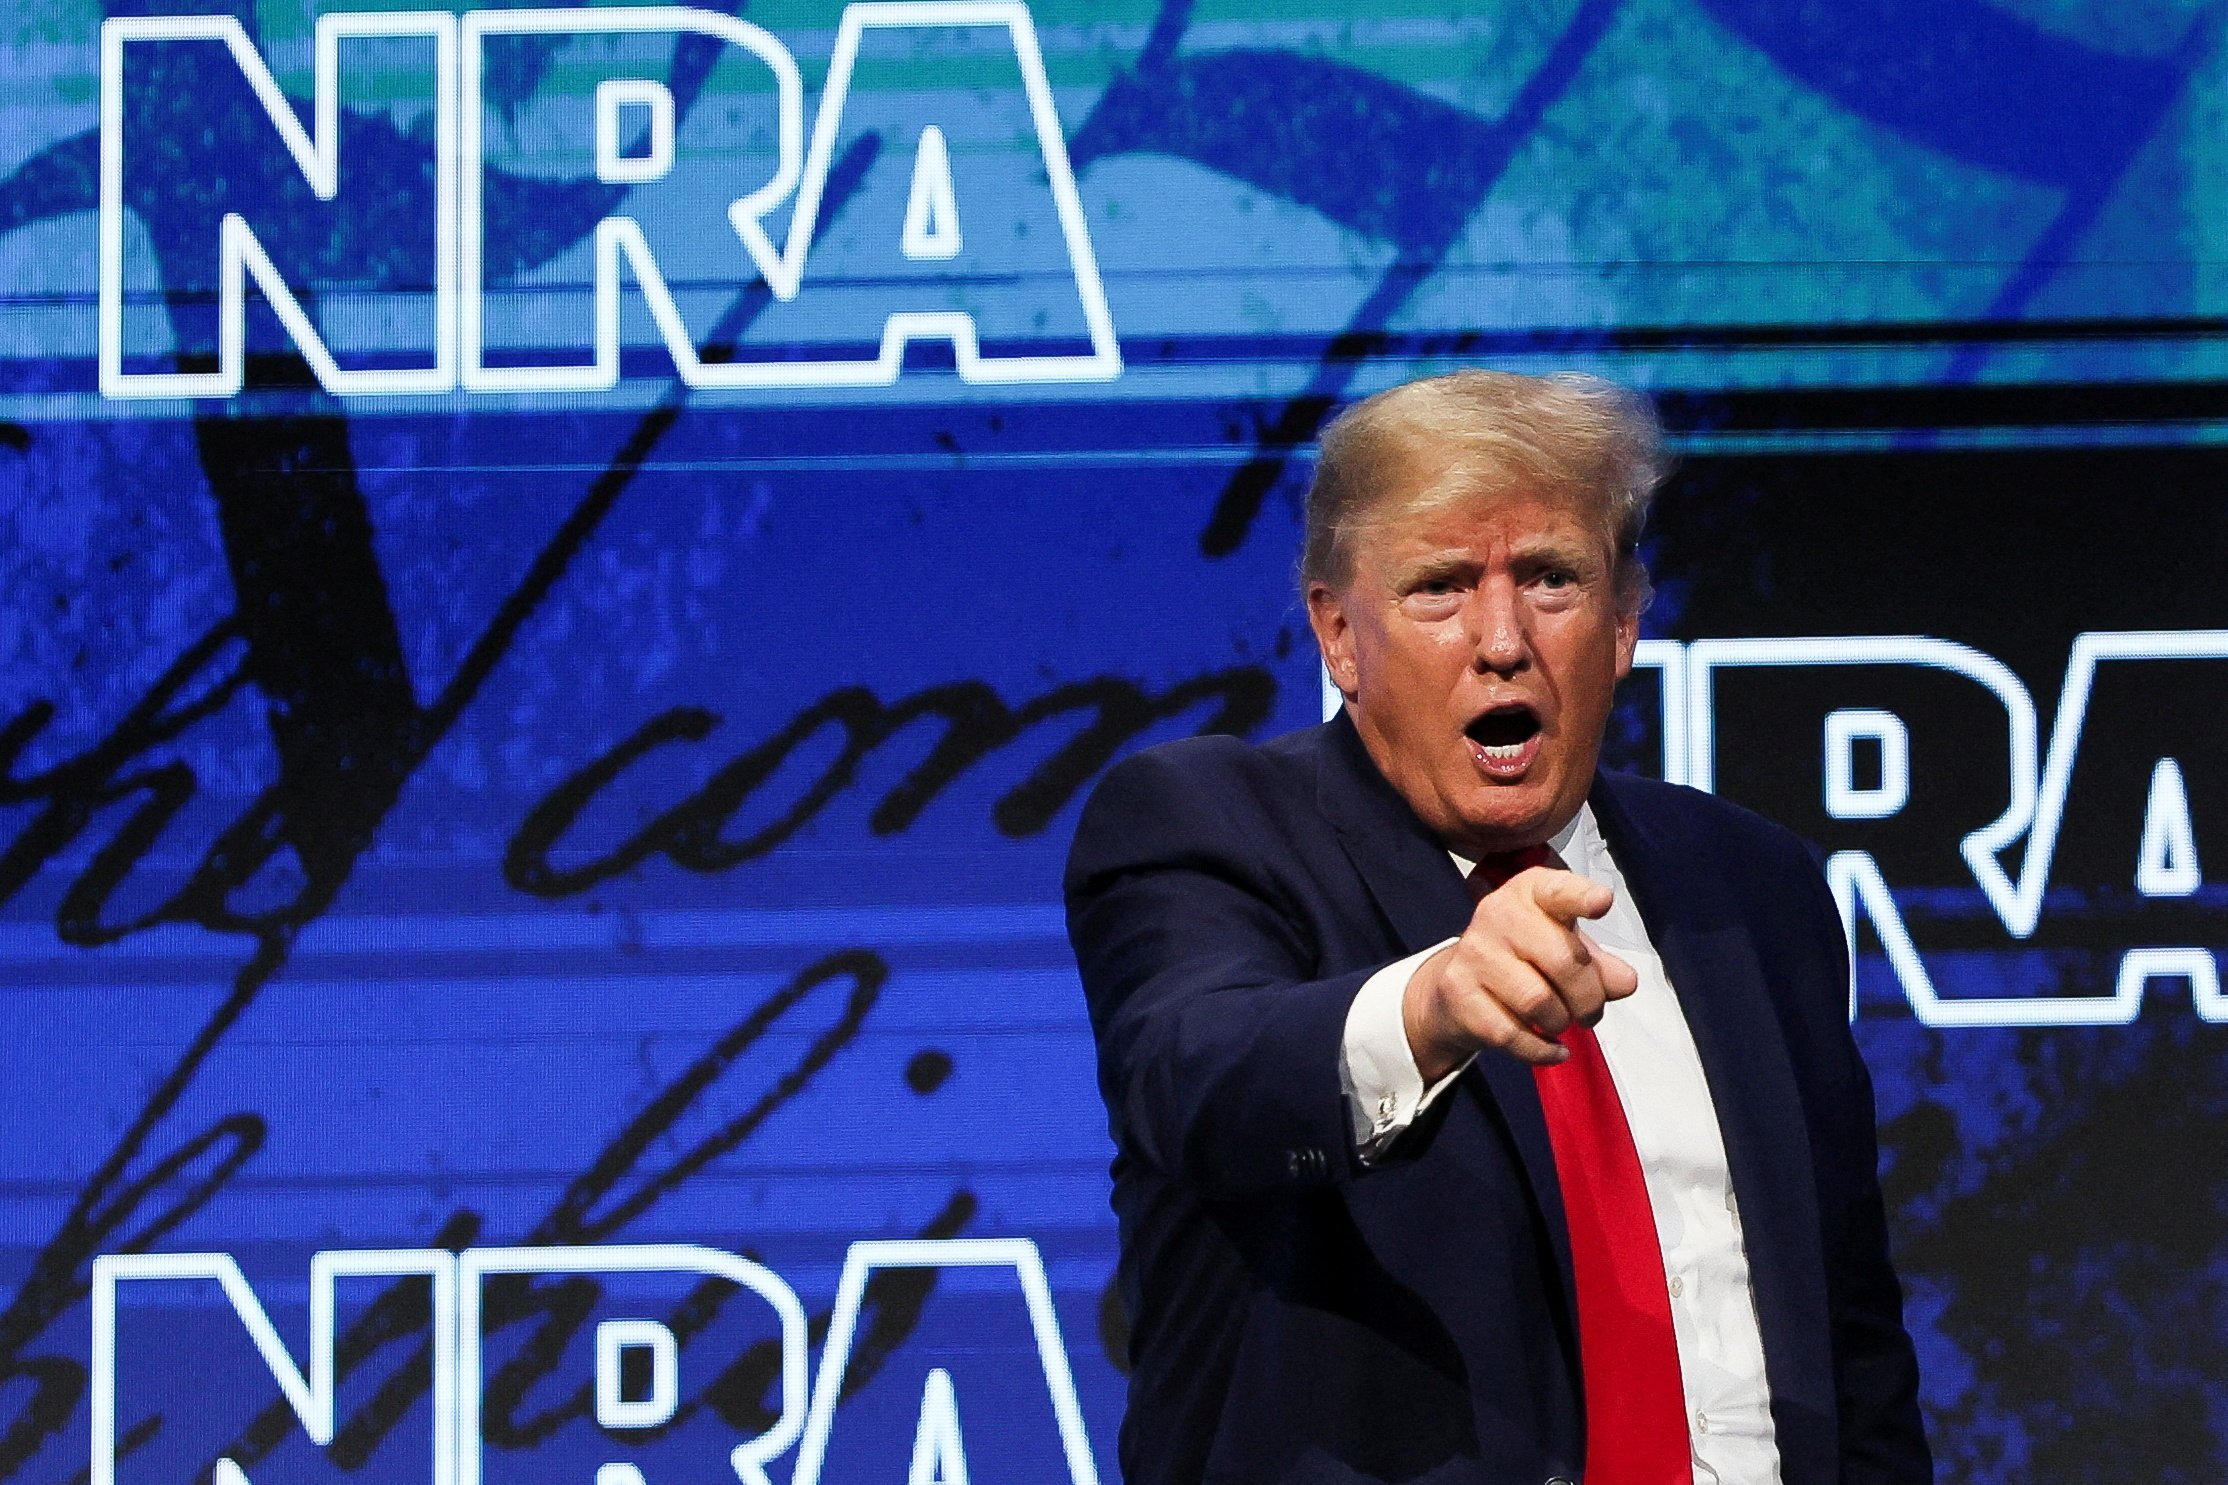 Former U.S. President Donald Trump gestures during the National Rifle Association (NRA) annual convention in Houston, Texas, U.S. May 27, 2022. REUTERS/Shannon Stapleton TPX IMAGES OF THE DAY